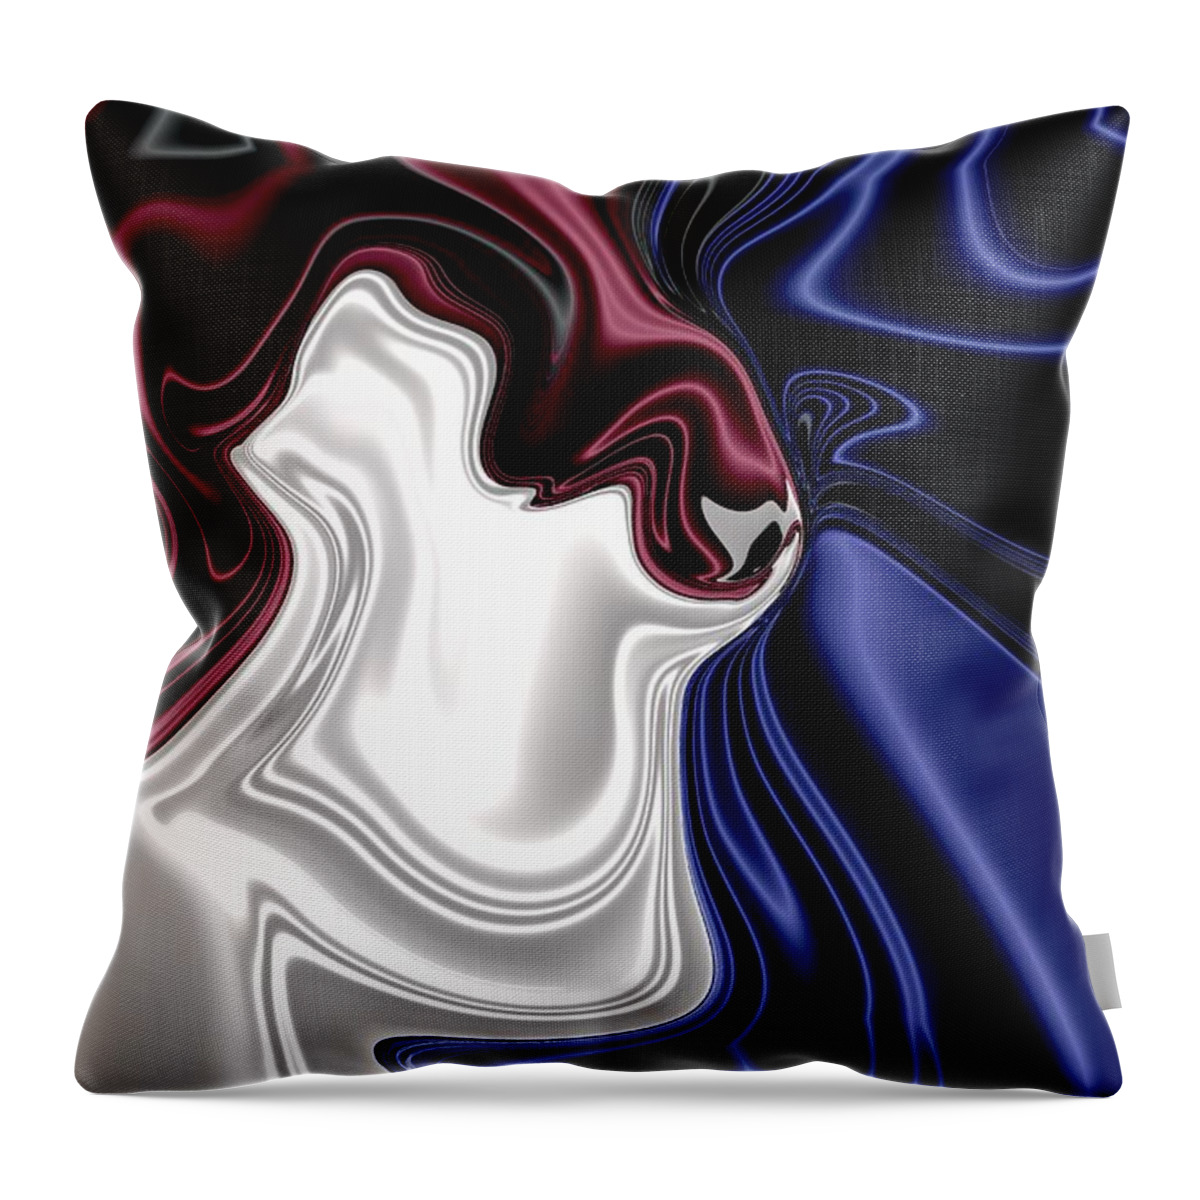  Throw Pillow featuring the digital art There Is Hope For America by Michelle Hoffmann